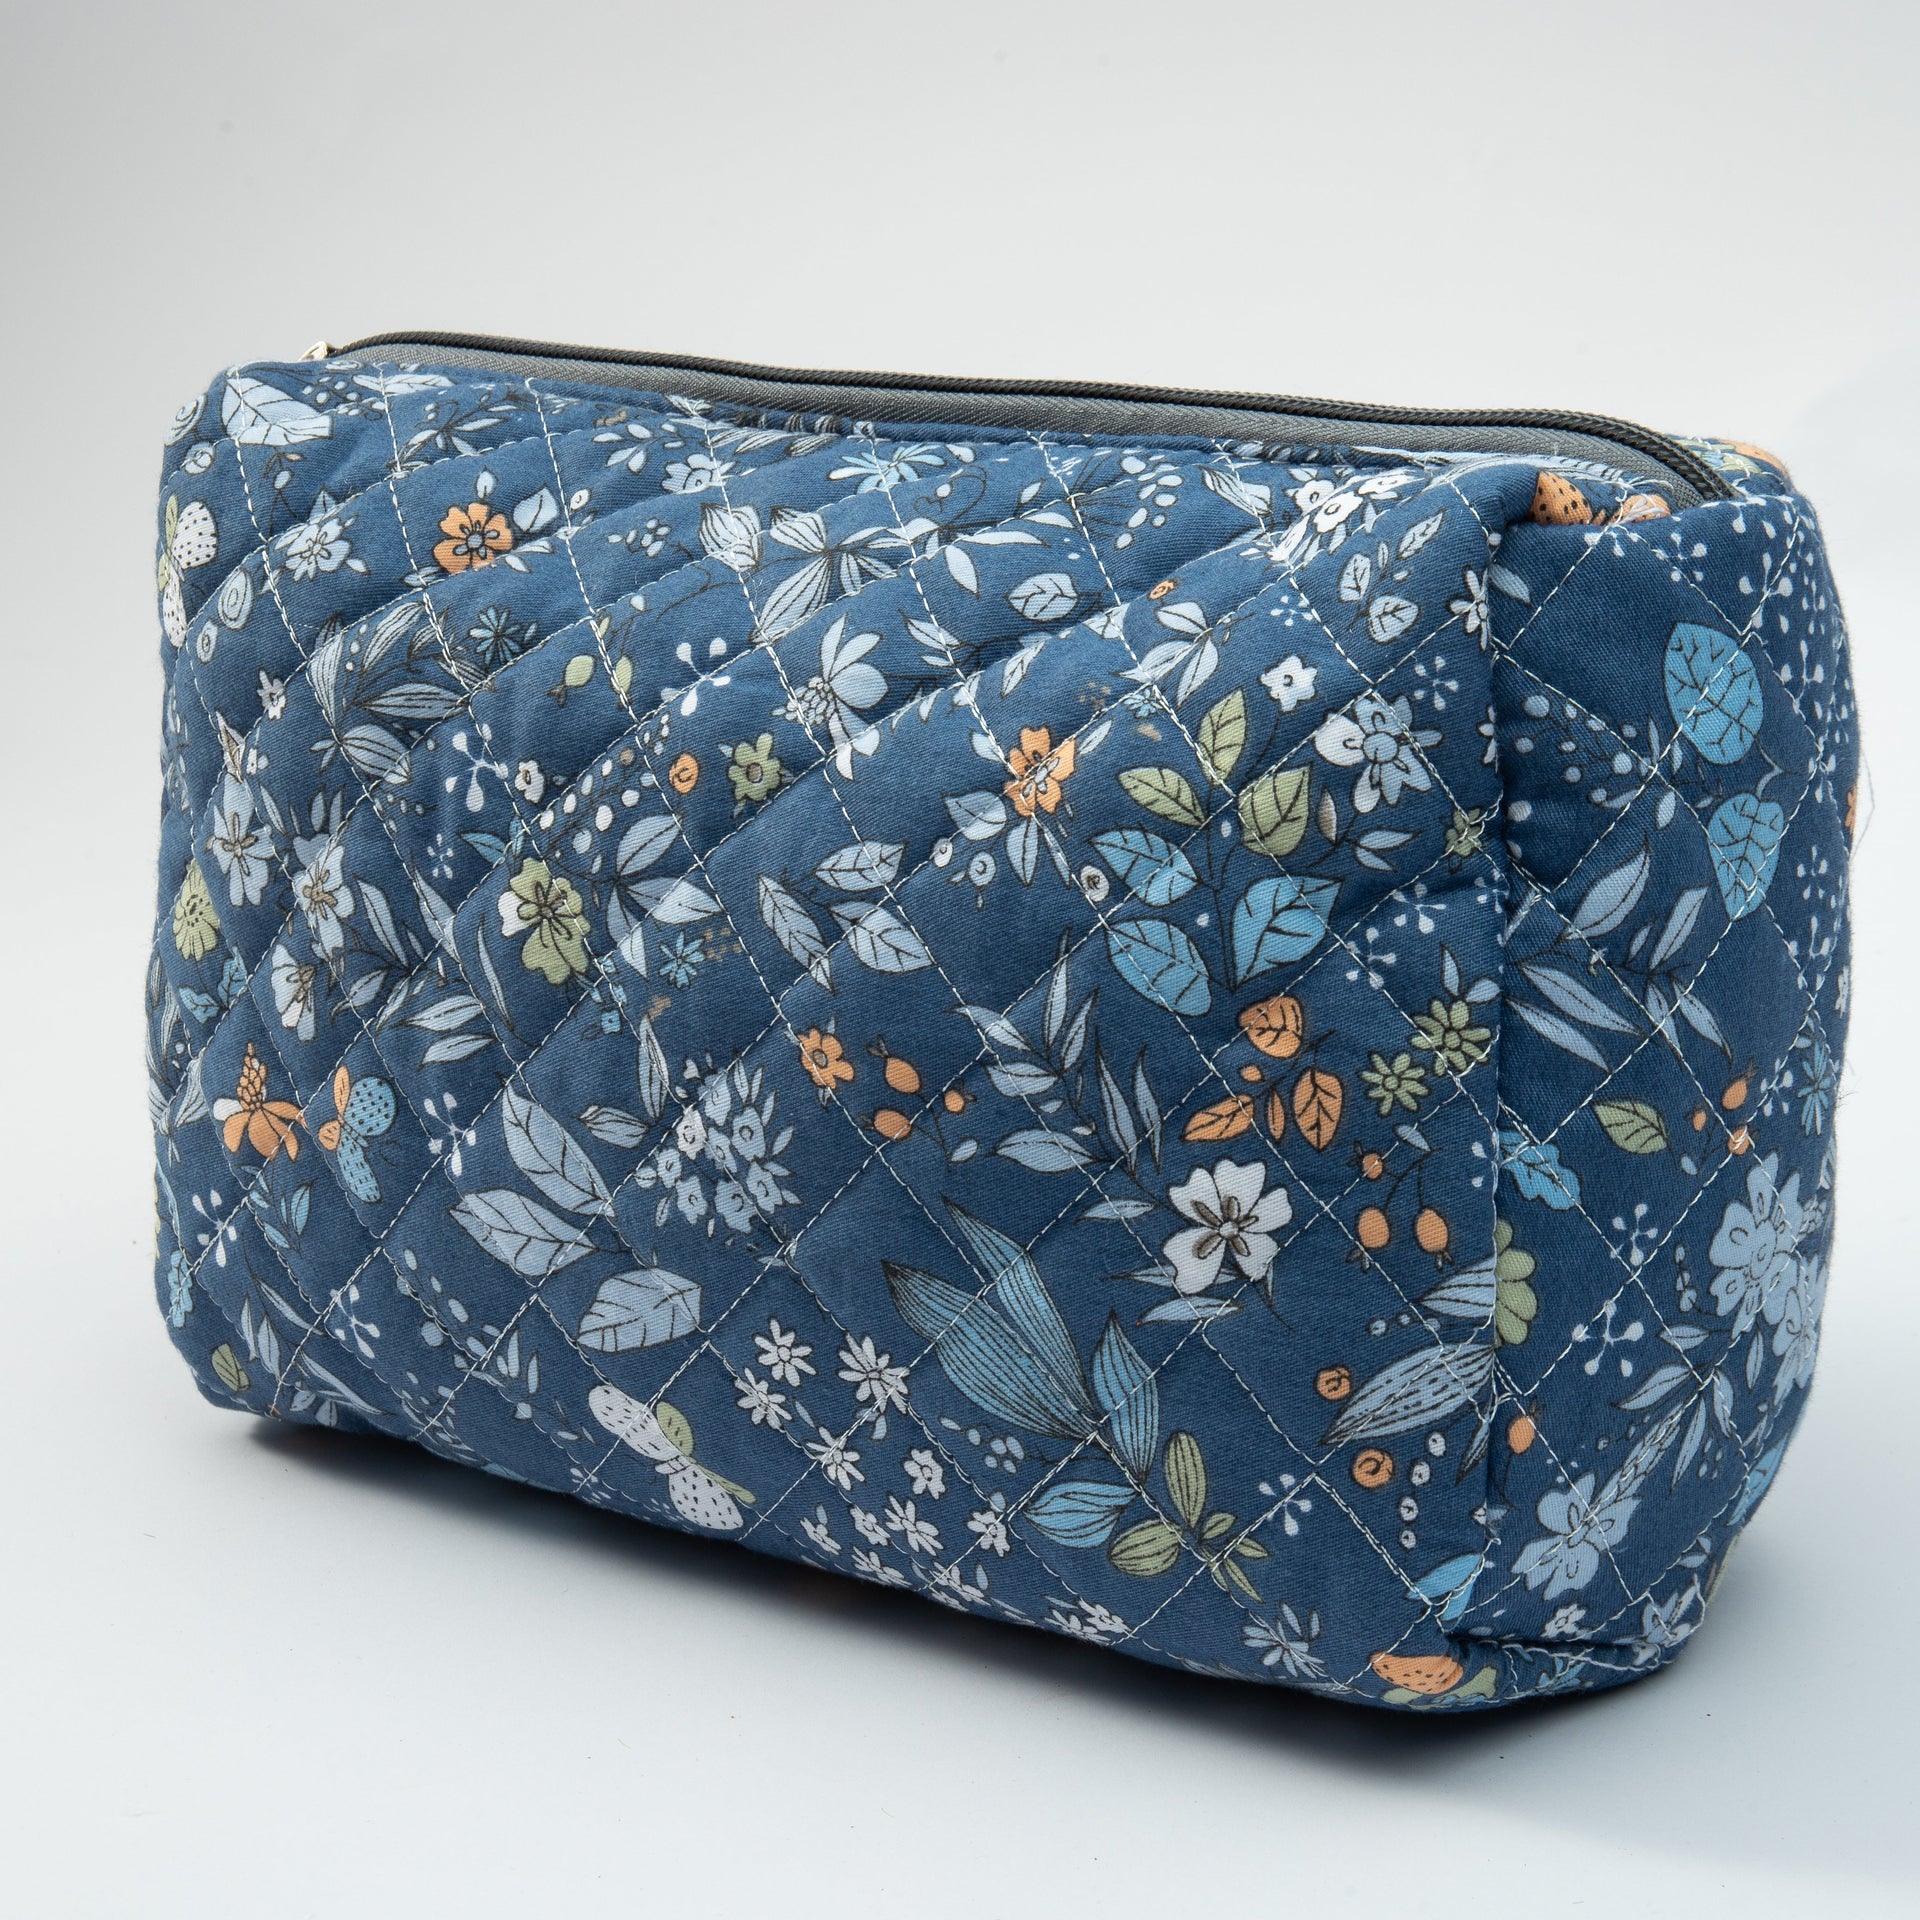 Blue Floral Essentials Makeup Pouch, Cosmetic Bag Stylish Pouch for Makeup  Accessories Travel Organiser Vanity Kit Stati